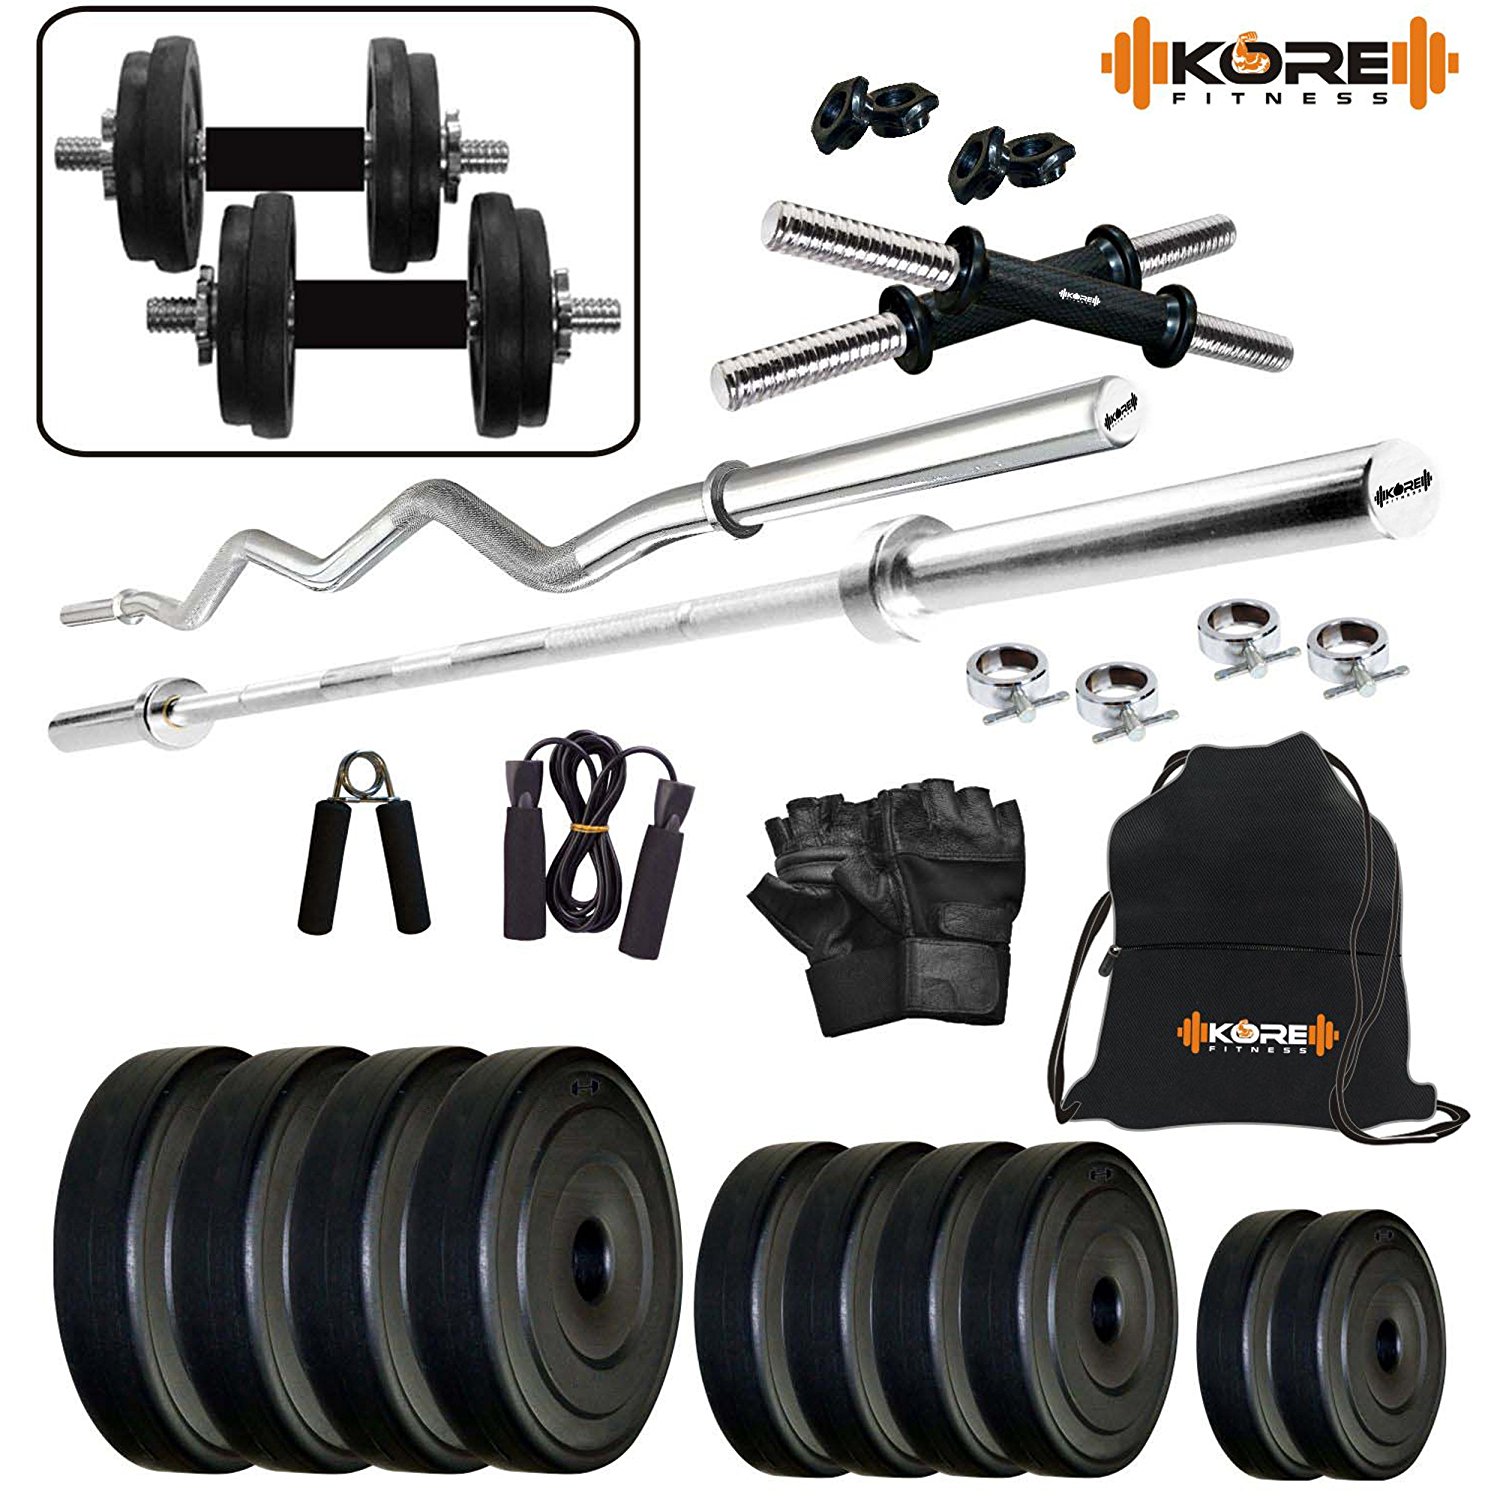 Kore K-PVC-20KGCOMBO2 Home Gym and Fitness Kit Price in India